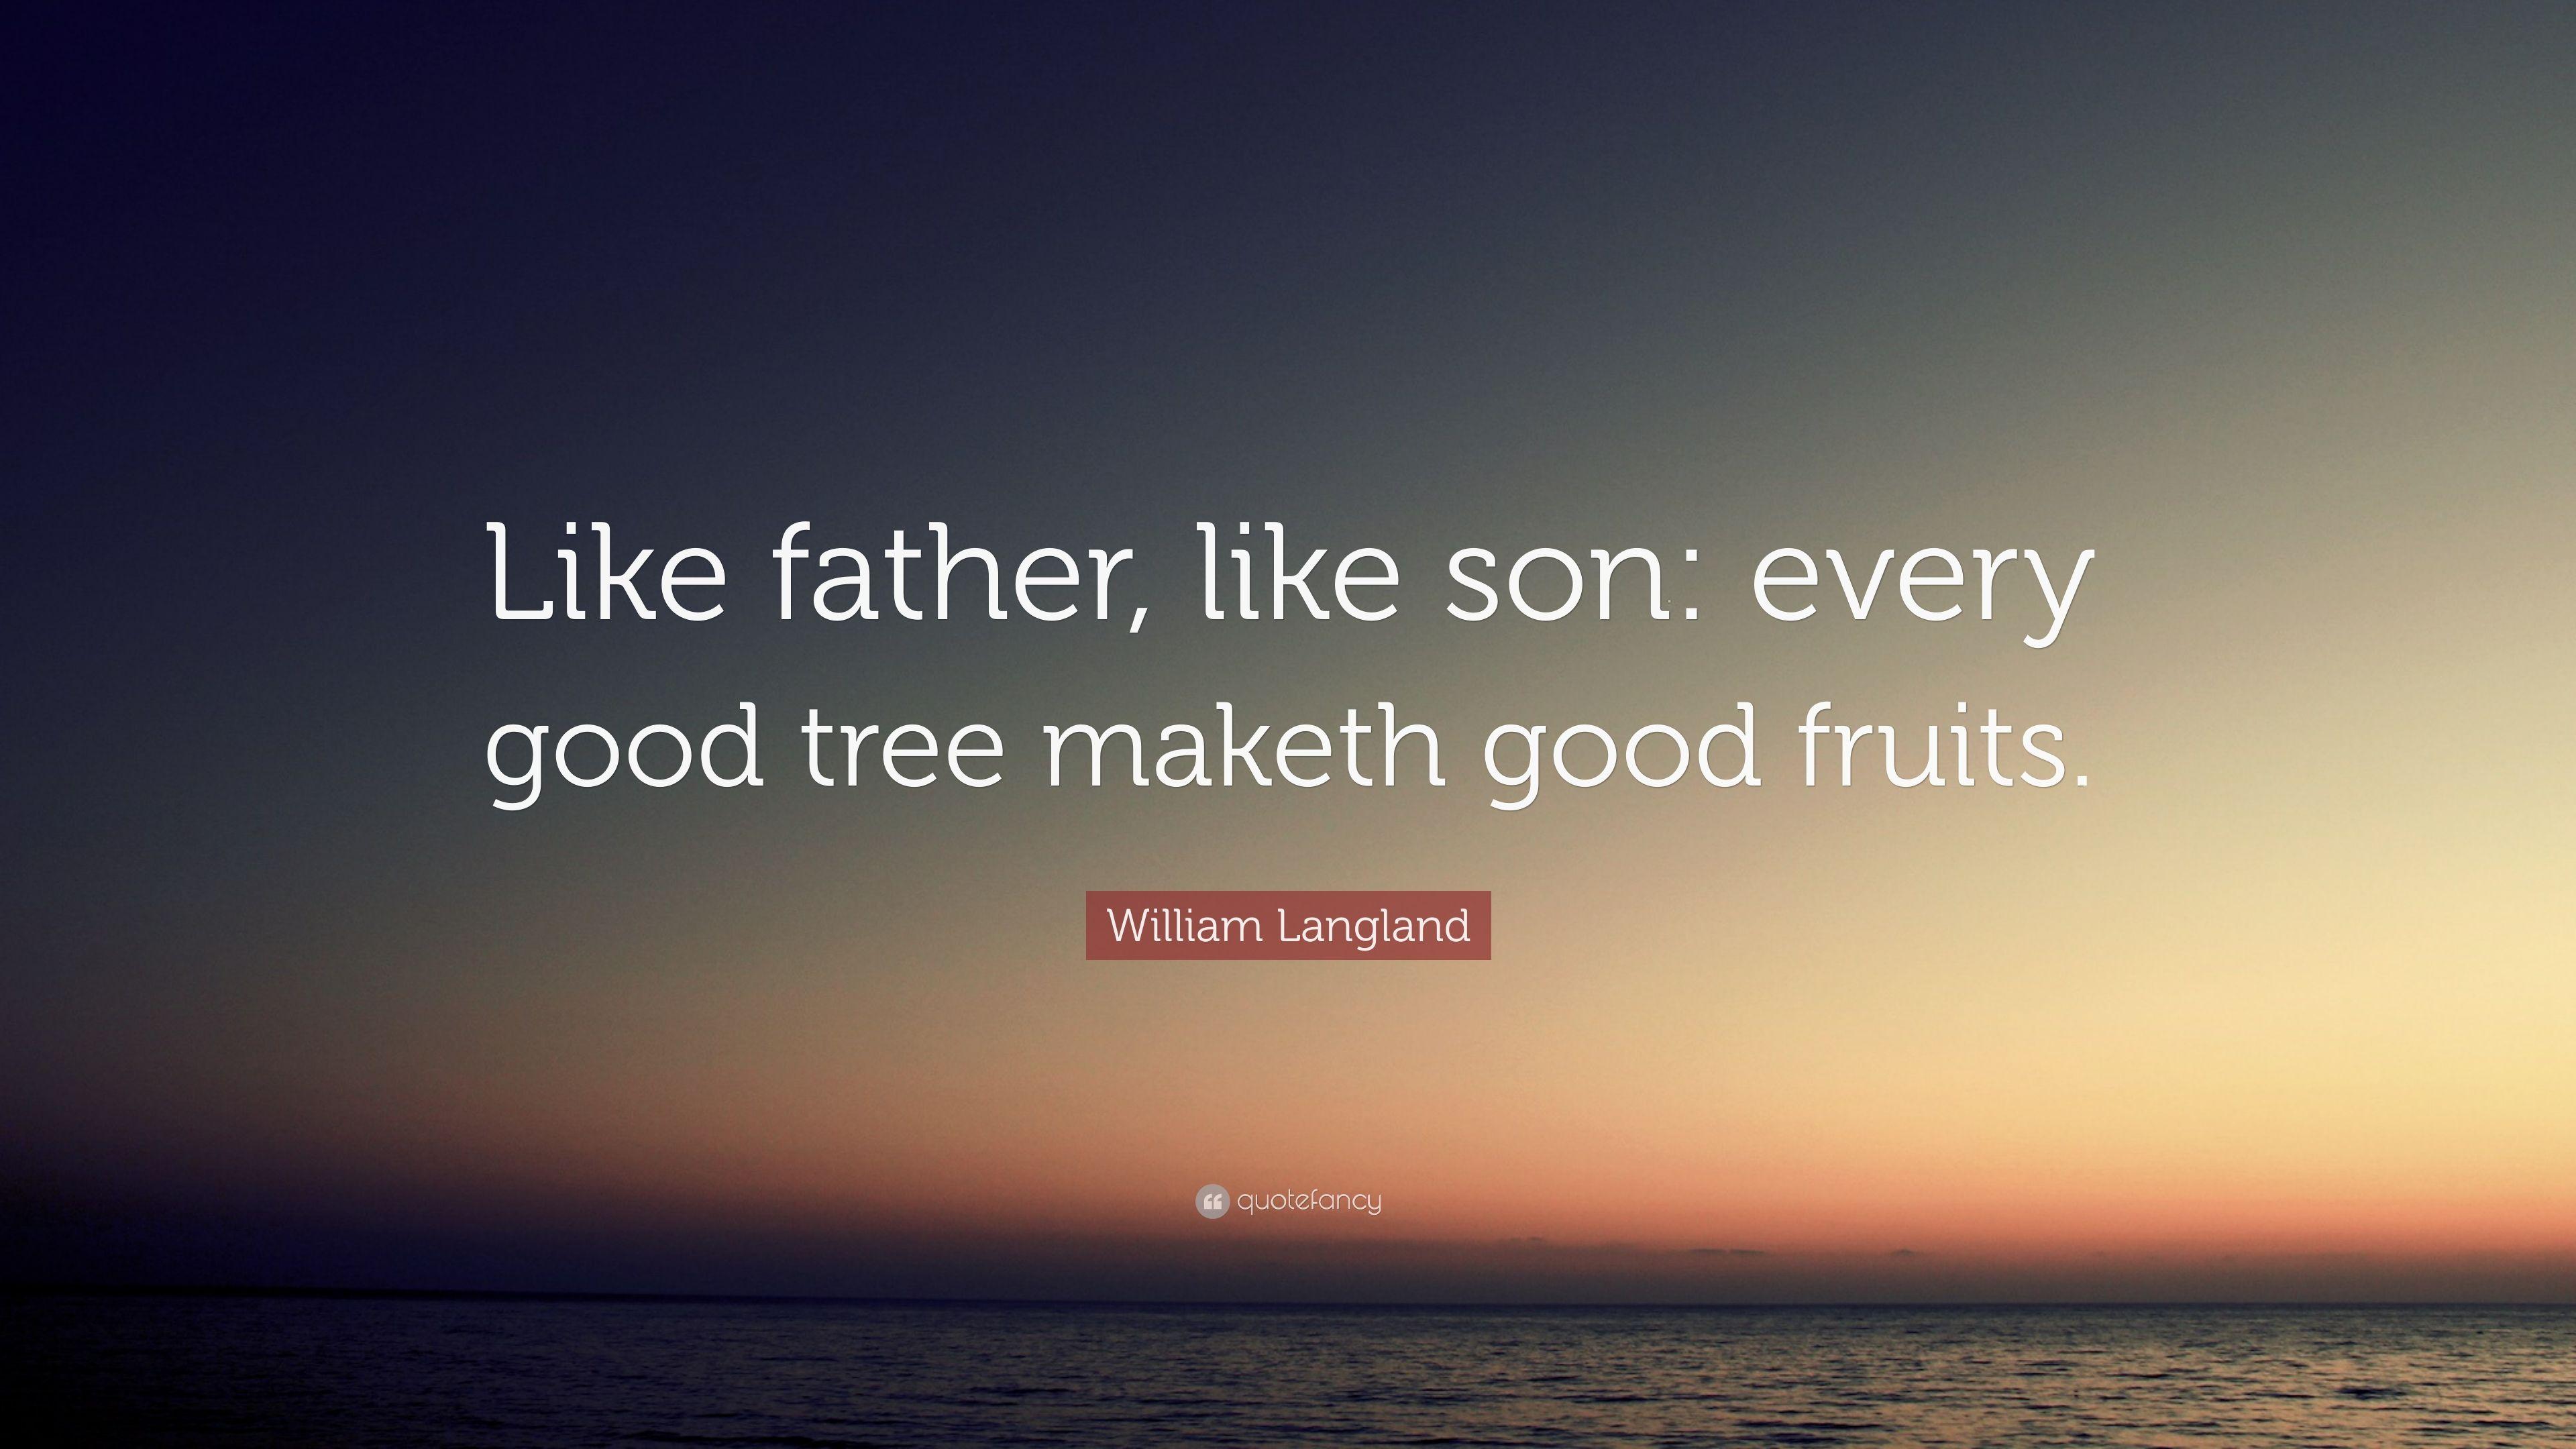 William Langland Quote: “Like father, like son: every good tree